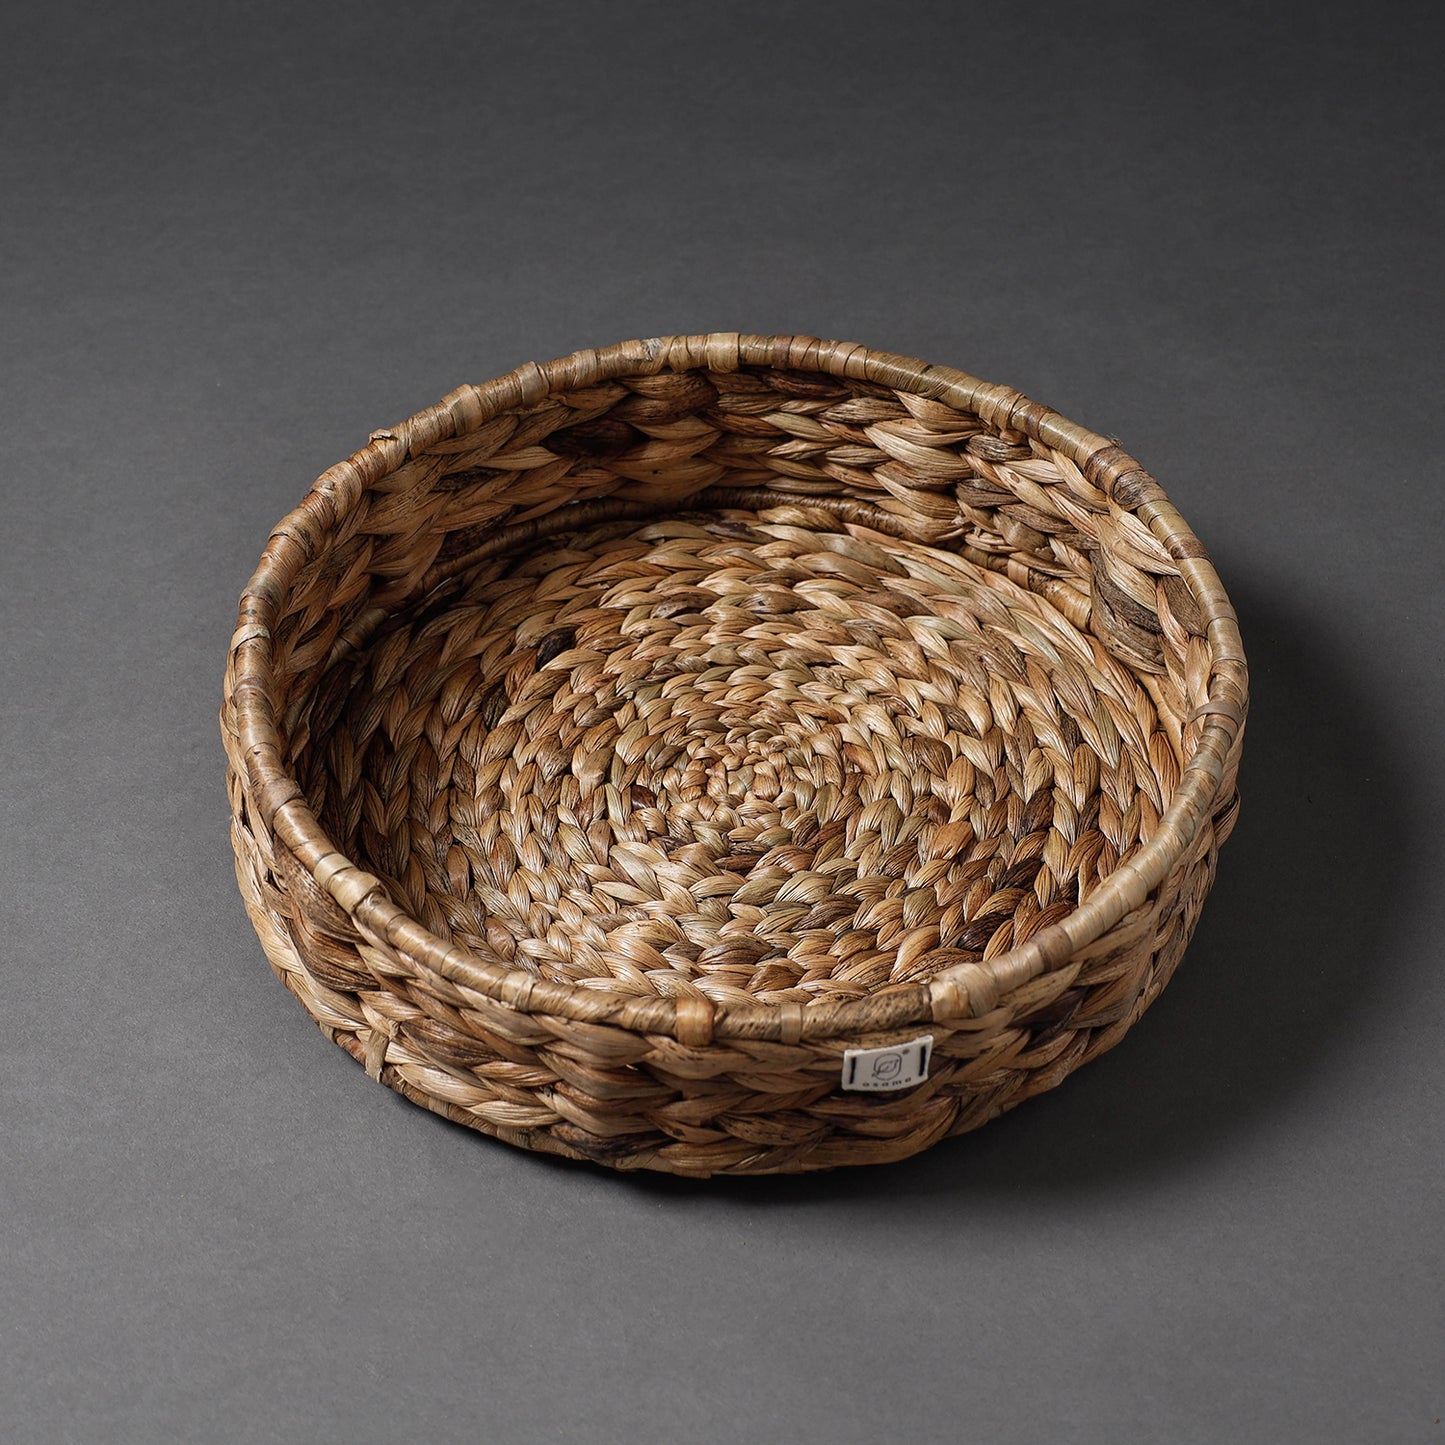 Handcrafted Organic Water Hyacinth Round Tray (12 x 12 in)